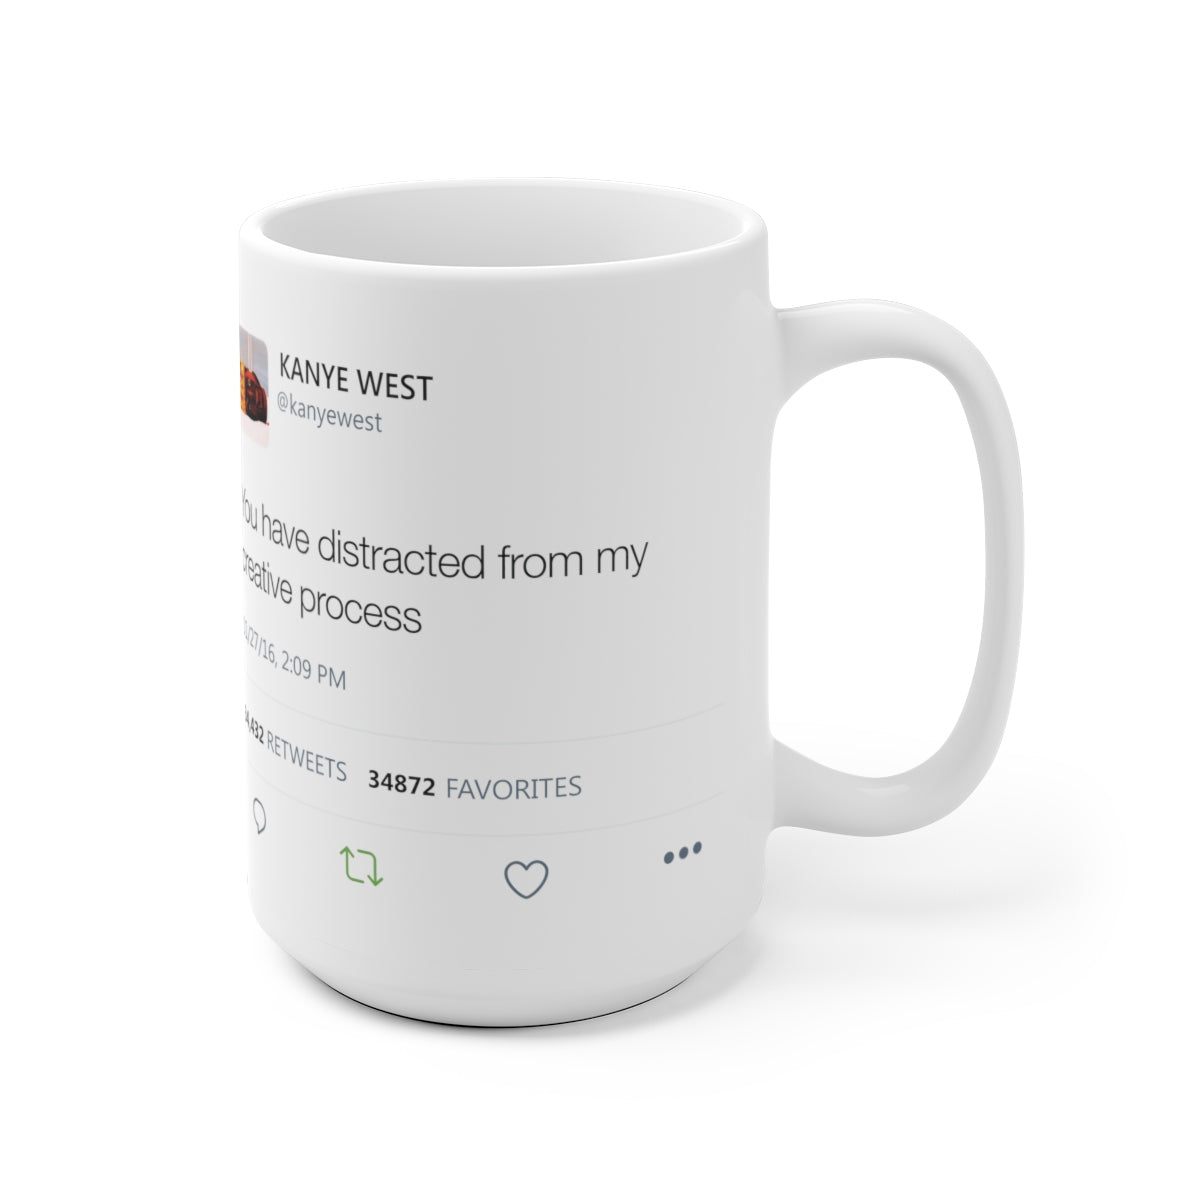 You have distracted from my creative process Kanye West Tweet Mug-Archethype